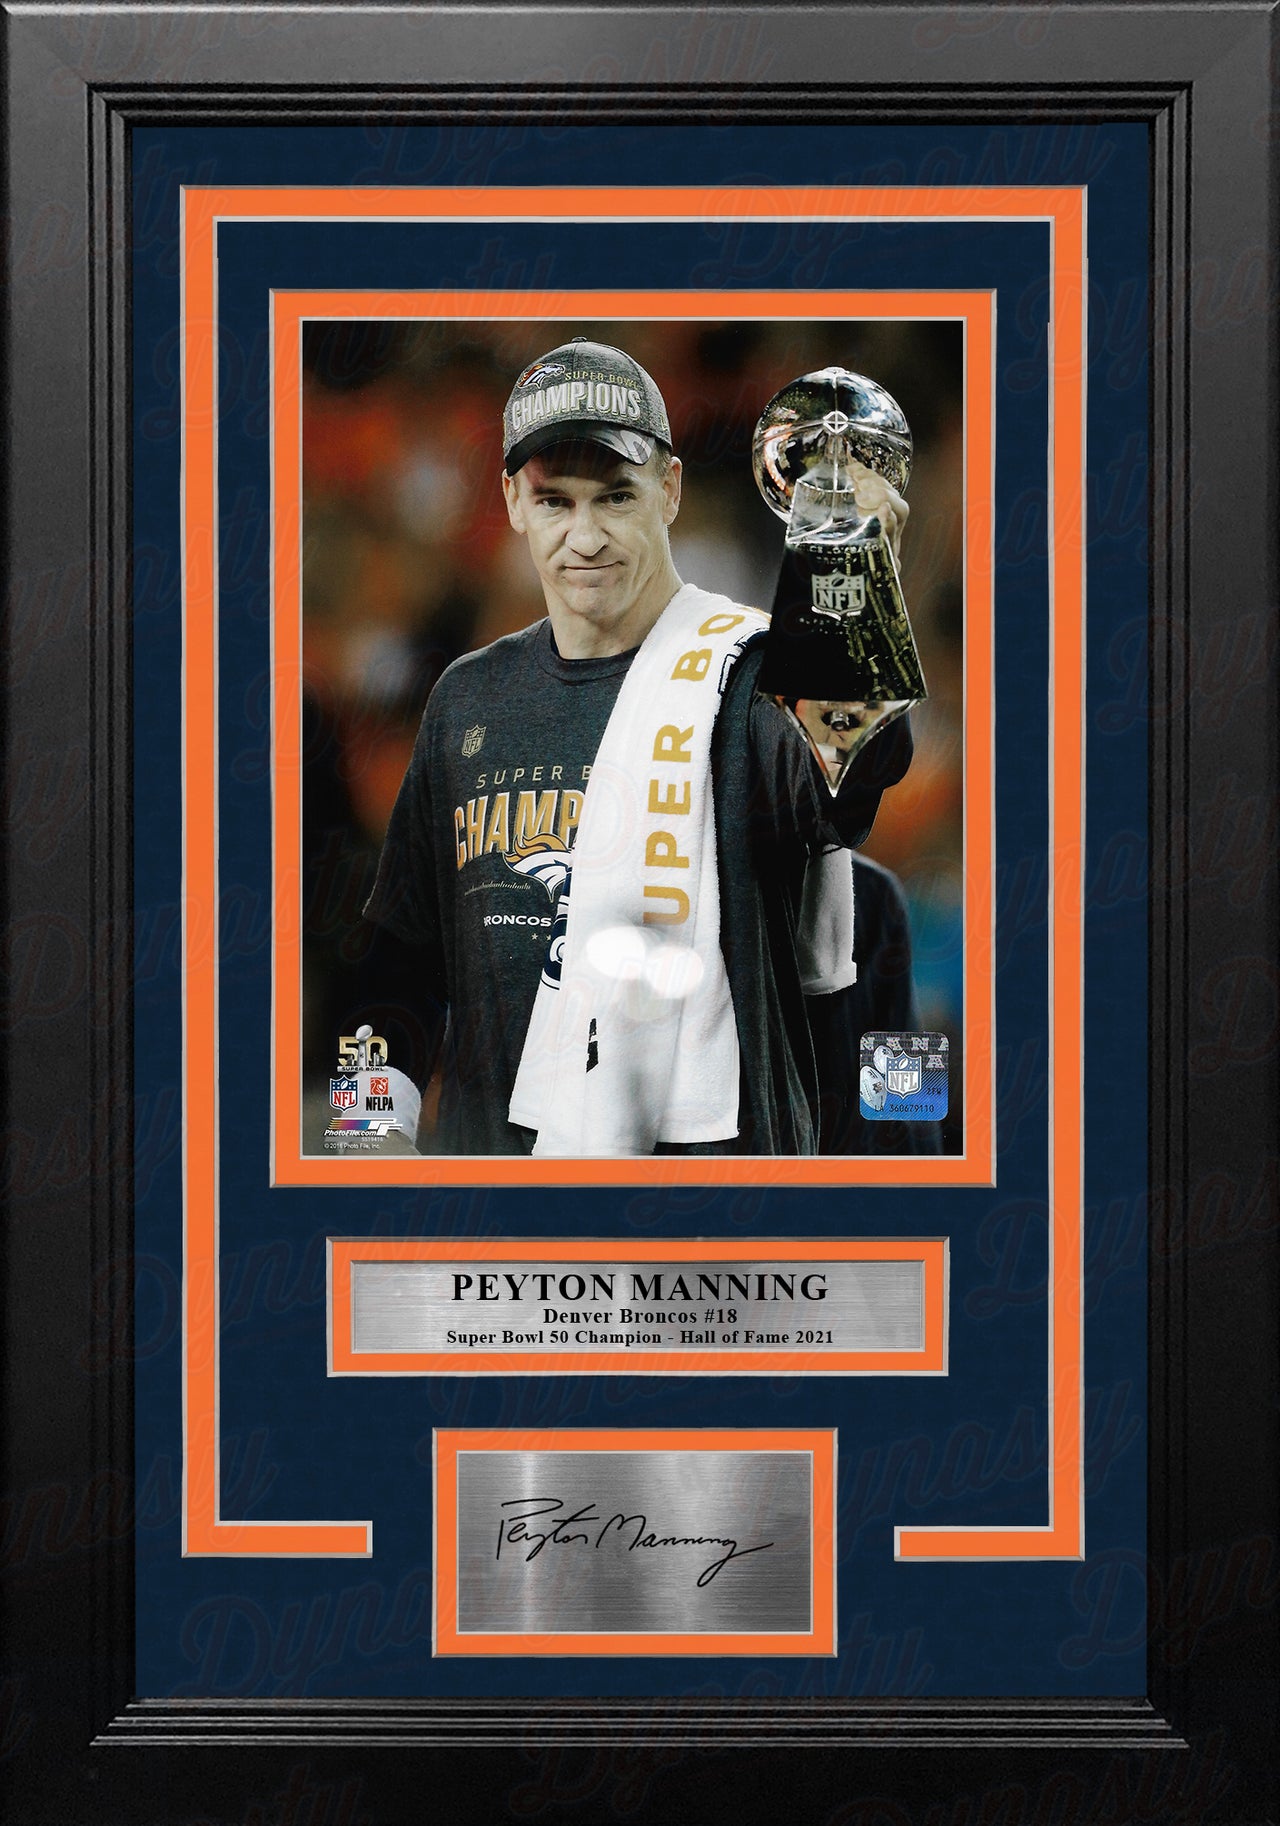 Peyton Manning Super Bowl Trophy Denver Broncos 8x10 Framed Football Photo with Engraved Autograph - Dynasty Sports & Framing 